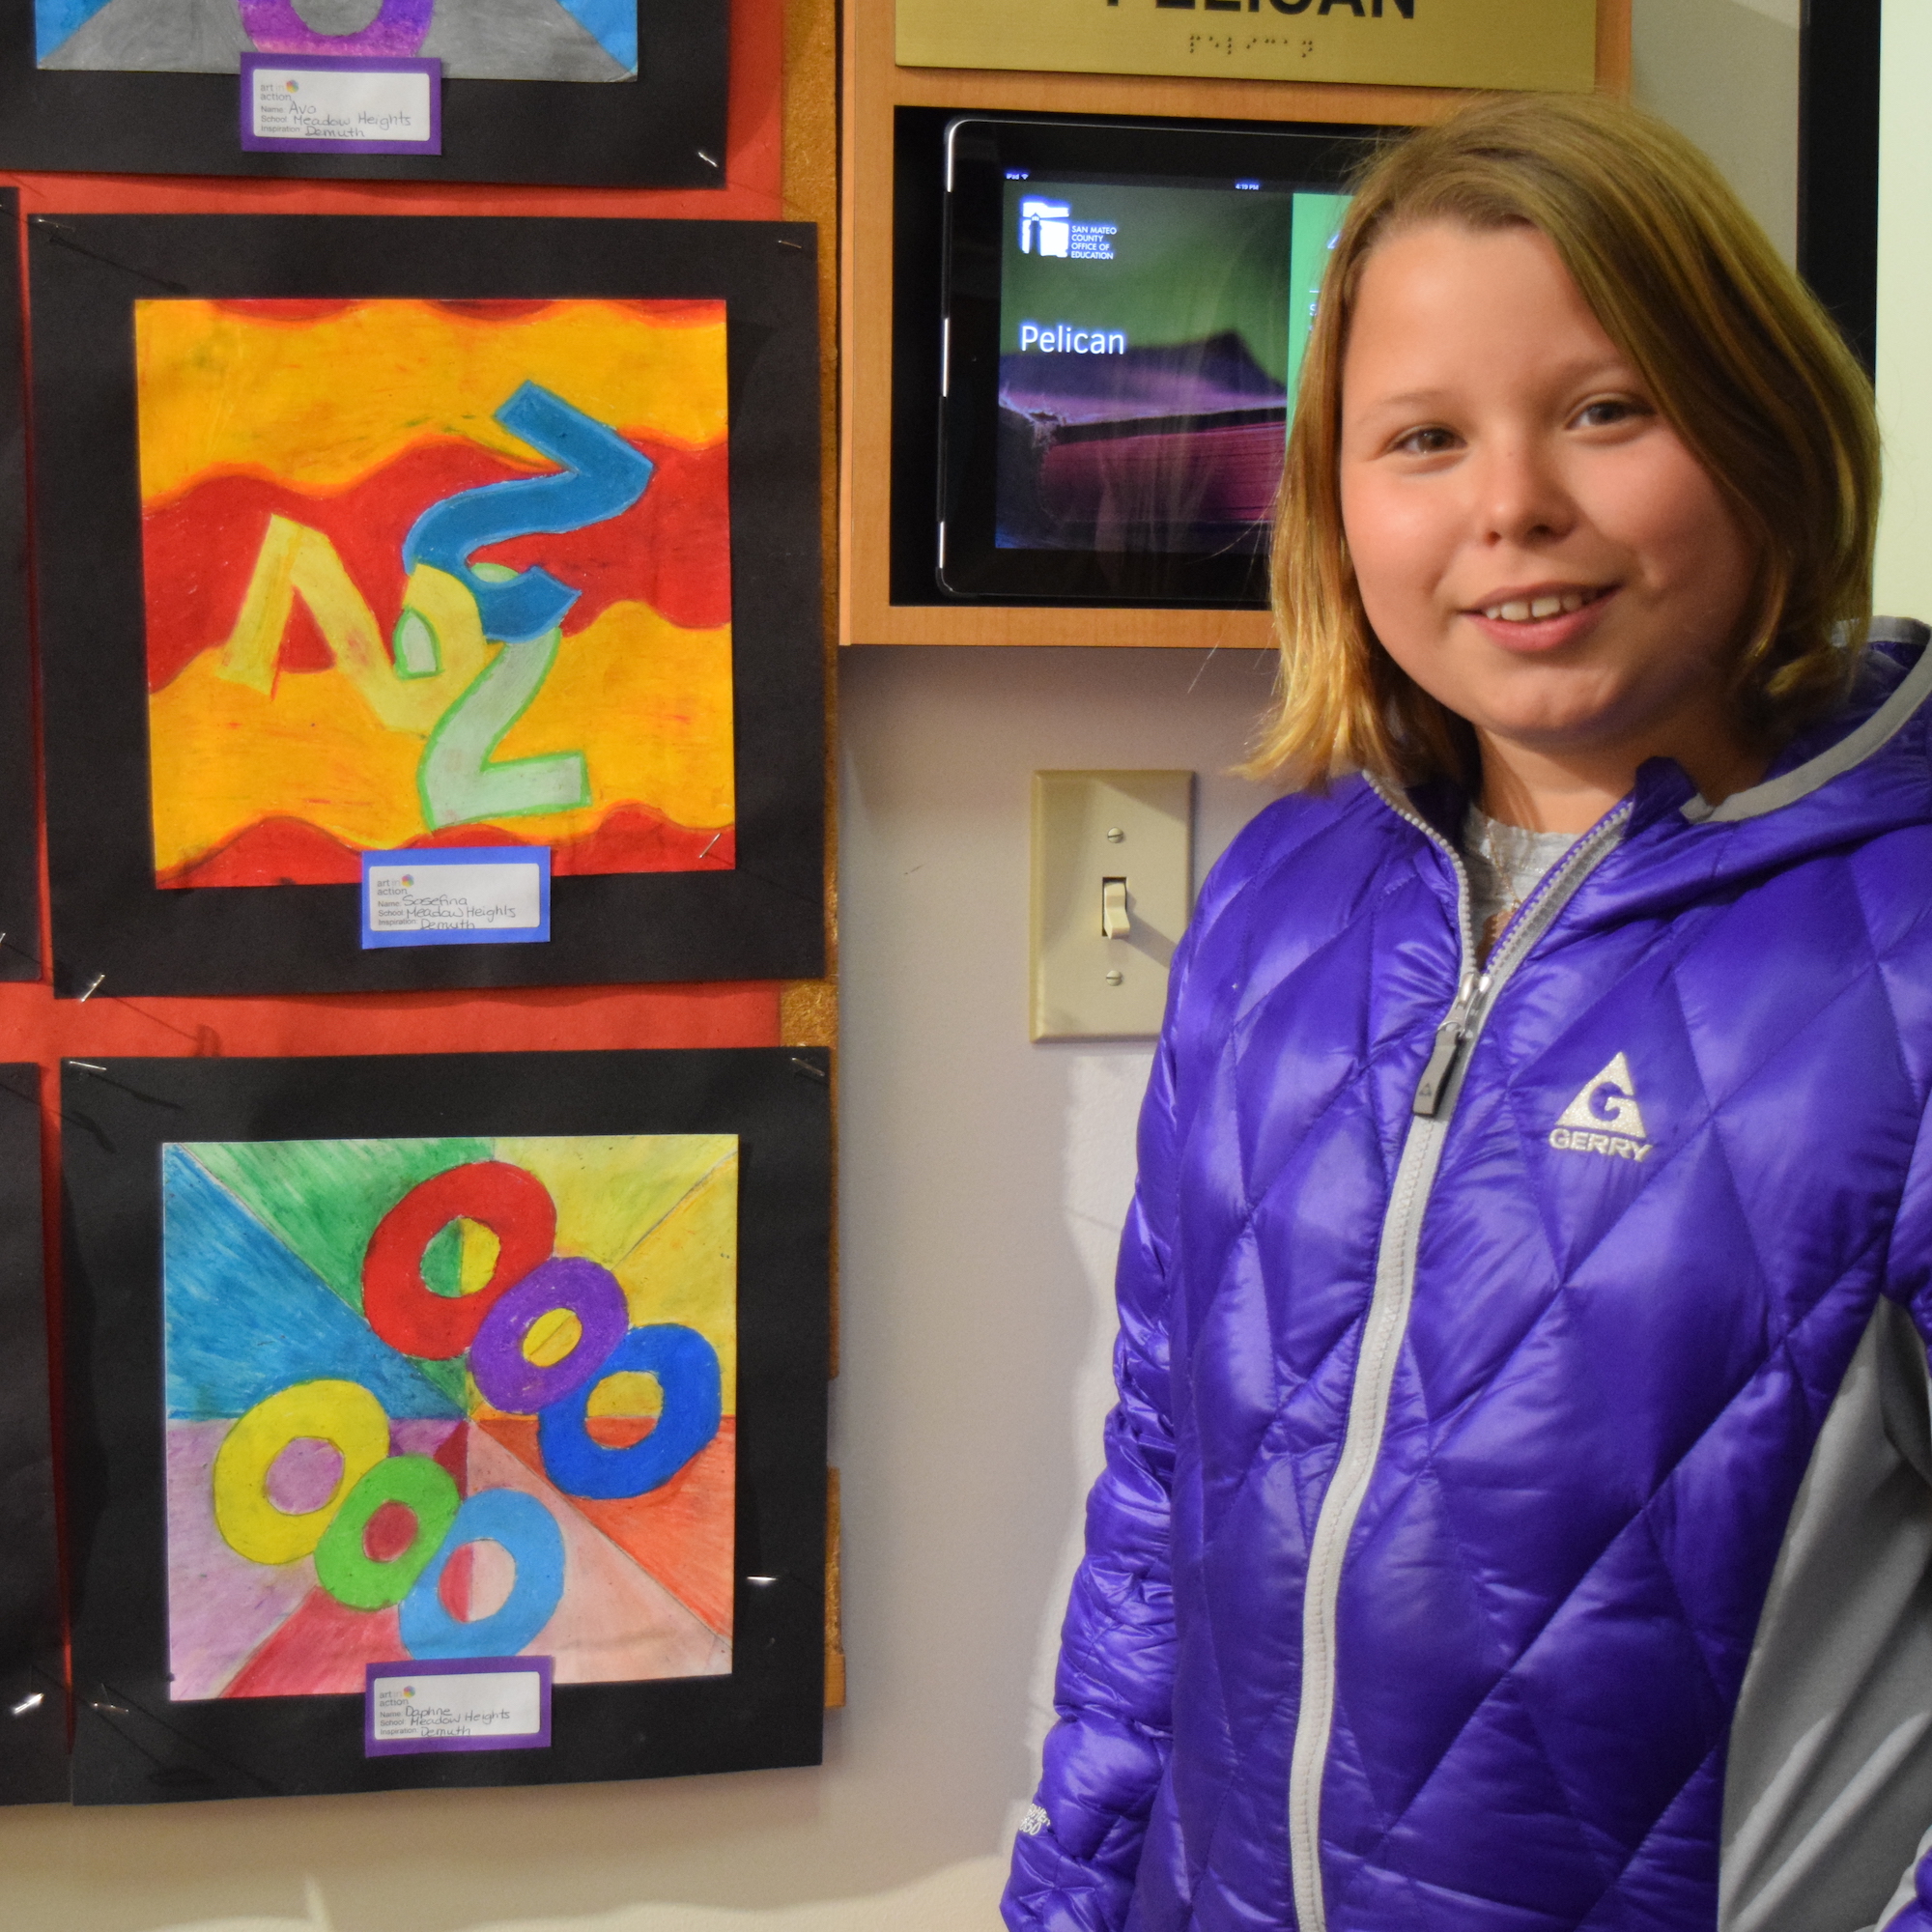 A student stands by her artwork displayed at the 51Թ.